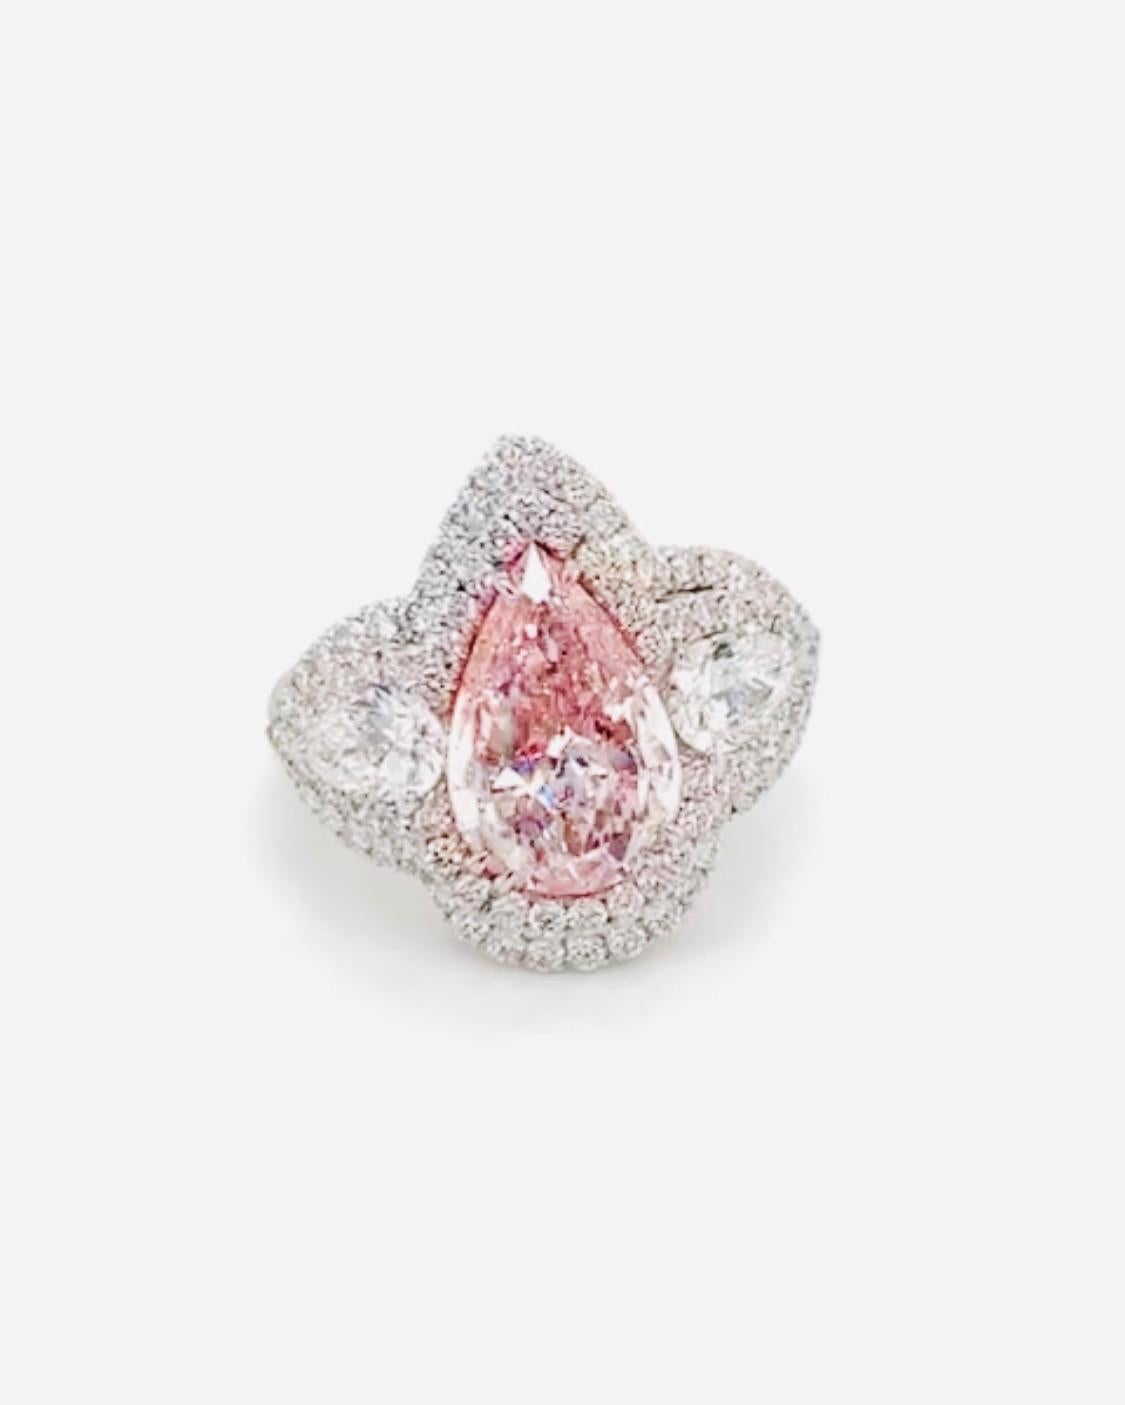 From the Emilio Jewelry museum vault in New York, at wholesale prices..
A gorgeous hand made ring featuring this sweet bubble gum color natural pink diamond ring. The center alone weighs just over 3.00 carats. Very fine piece, please inquire for